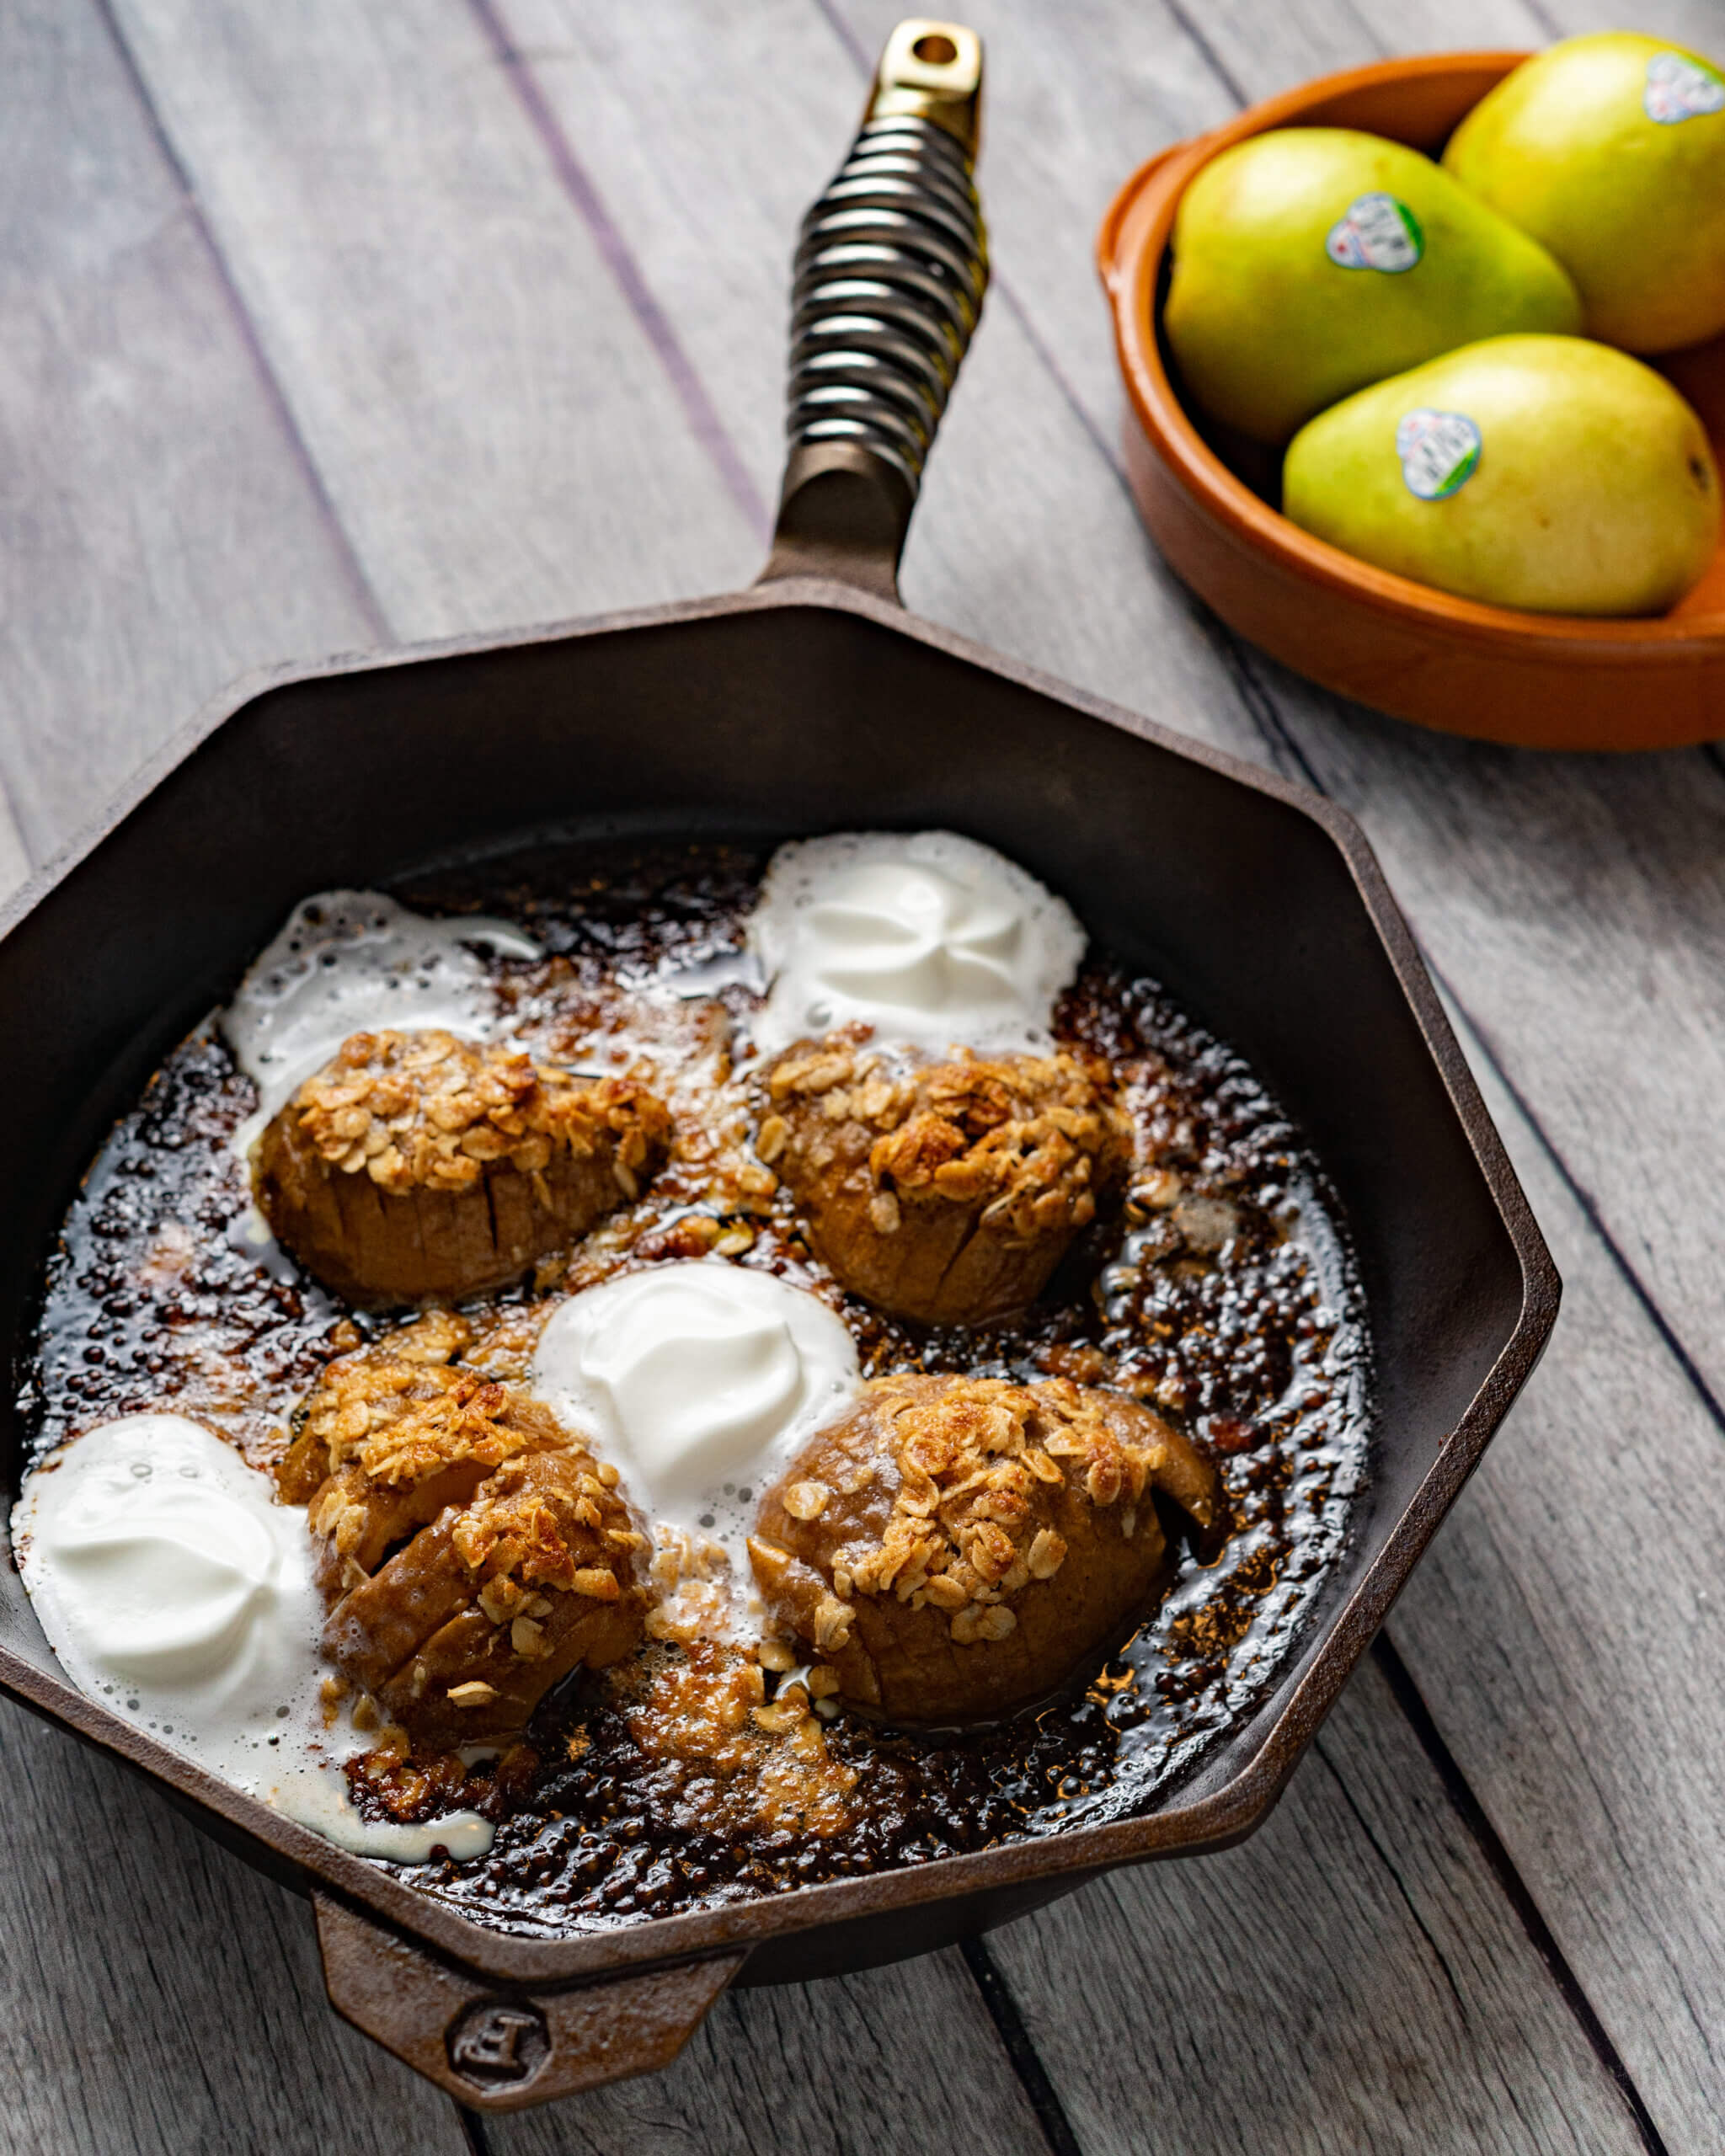 Hassetlback pears in a cast iron pan with ice cream dollops.